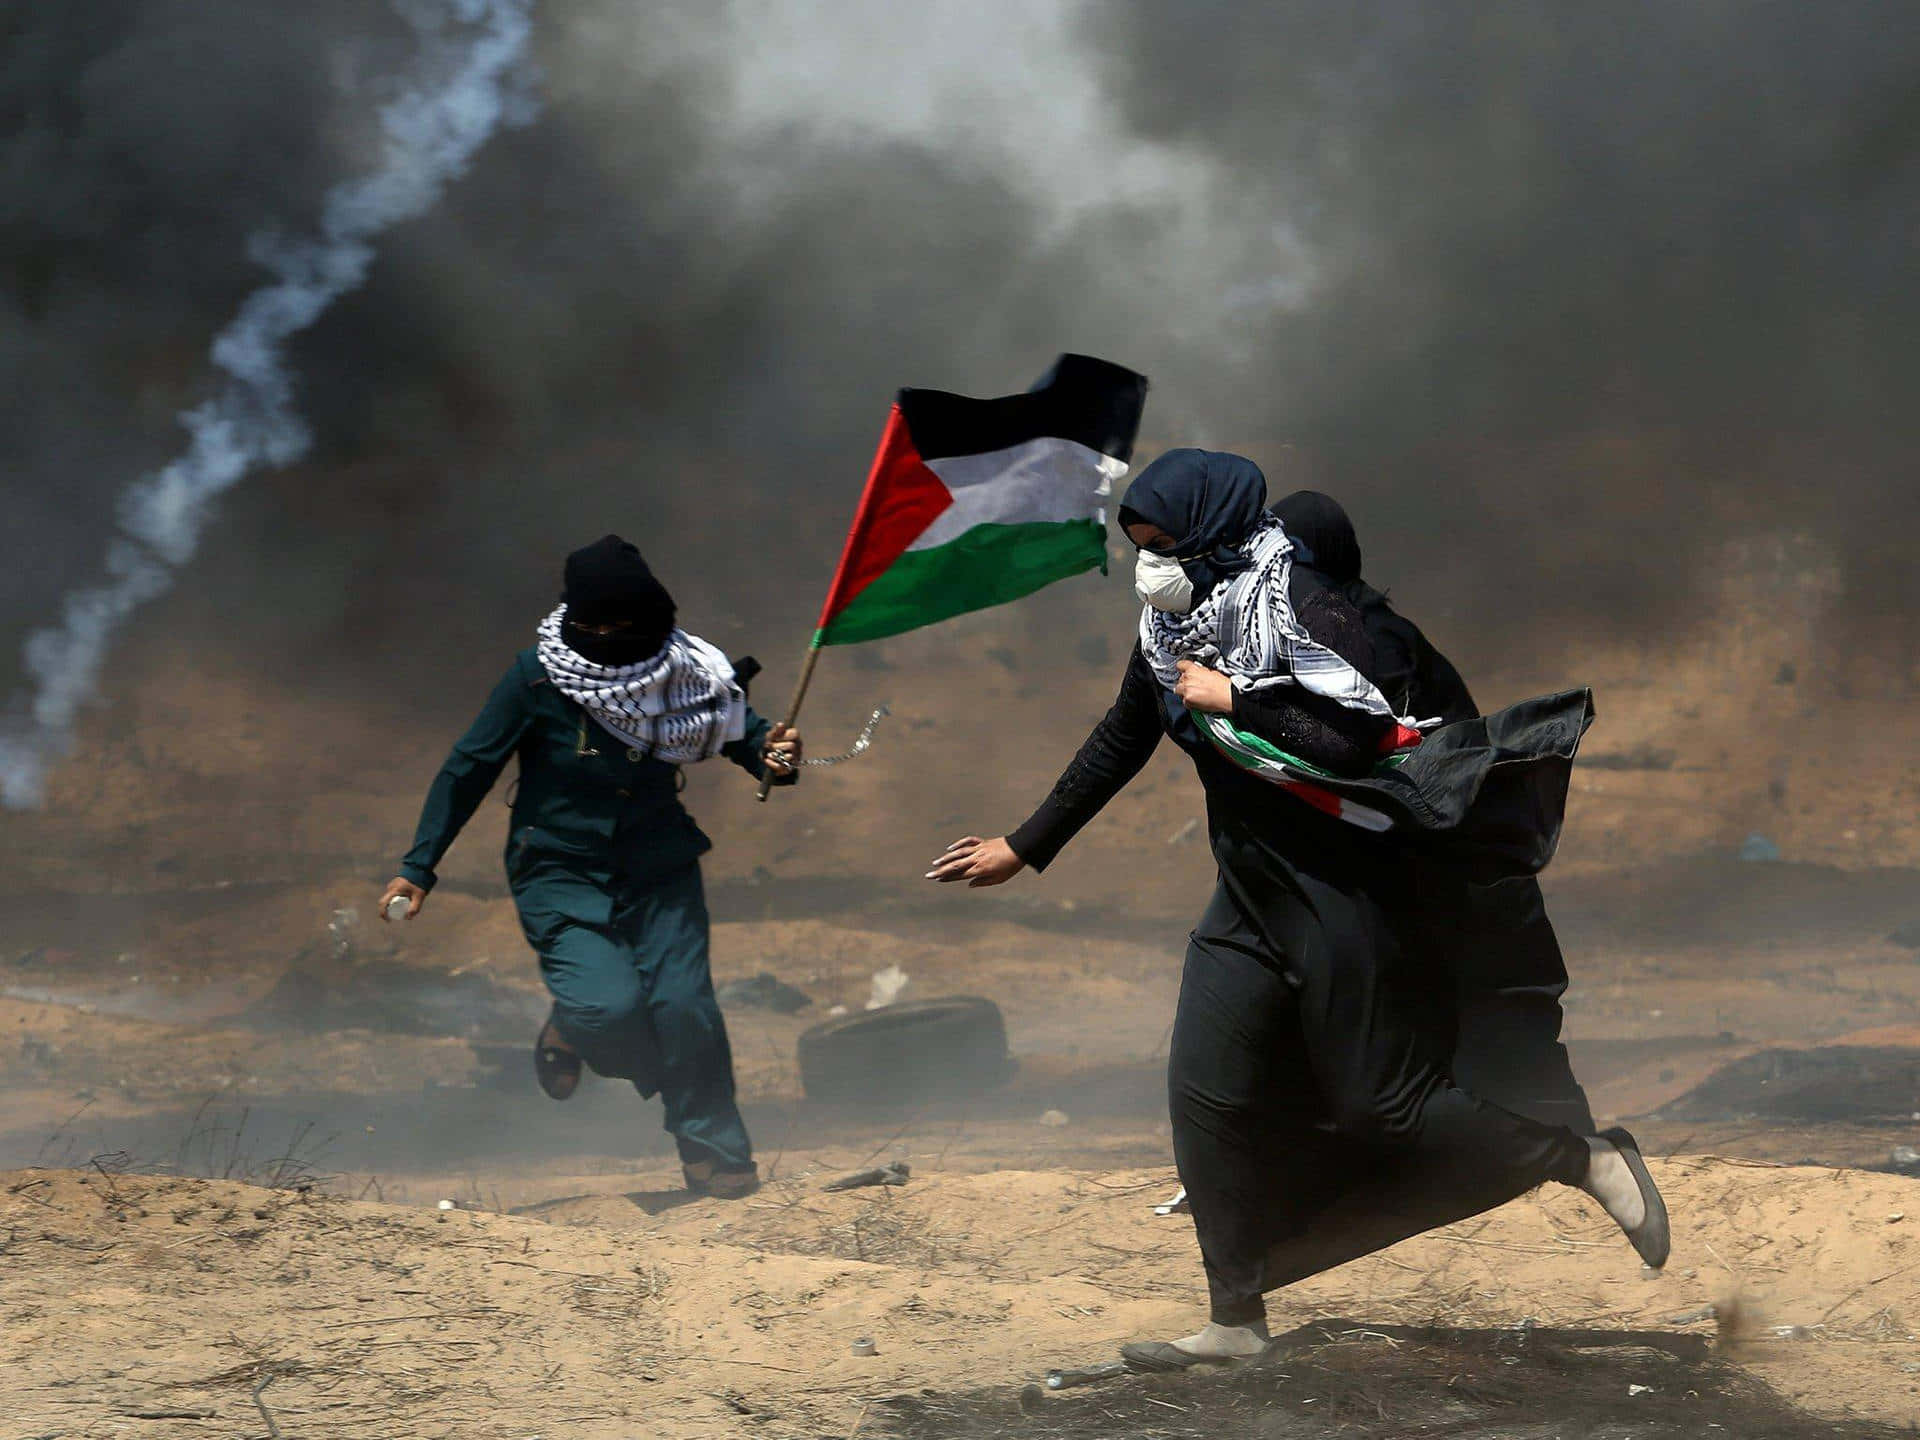 Two Women Running With A Palestinian Flag